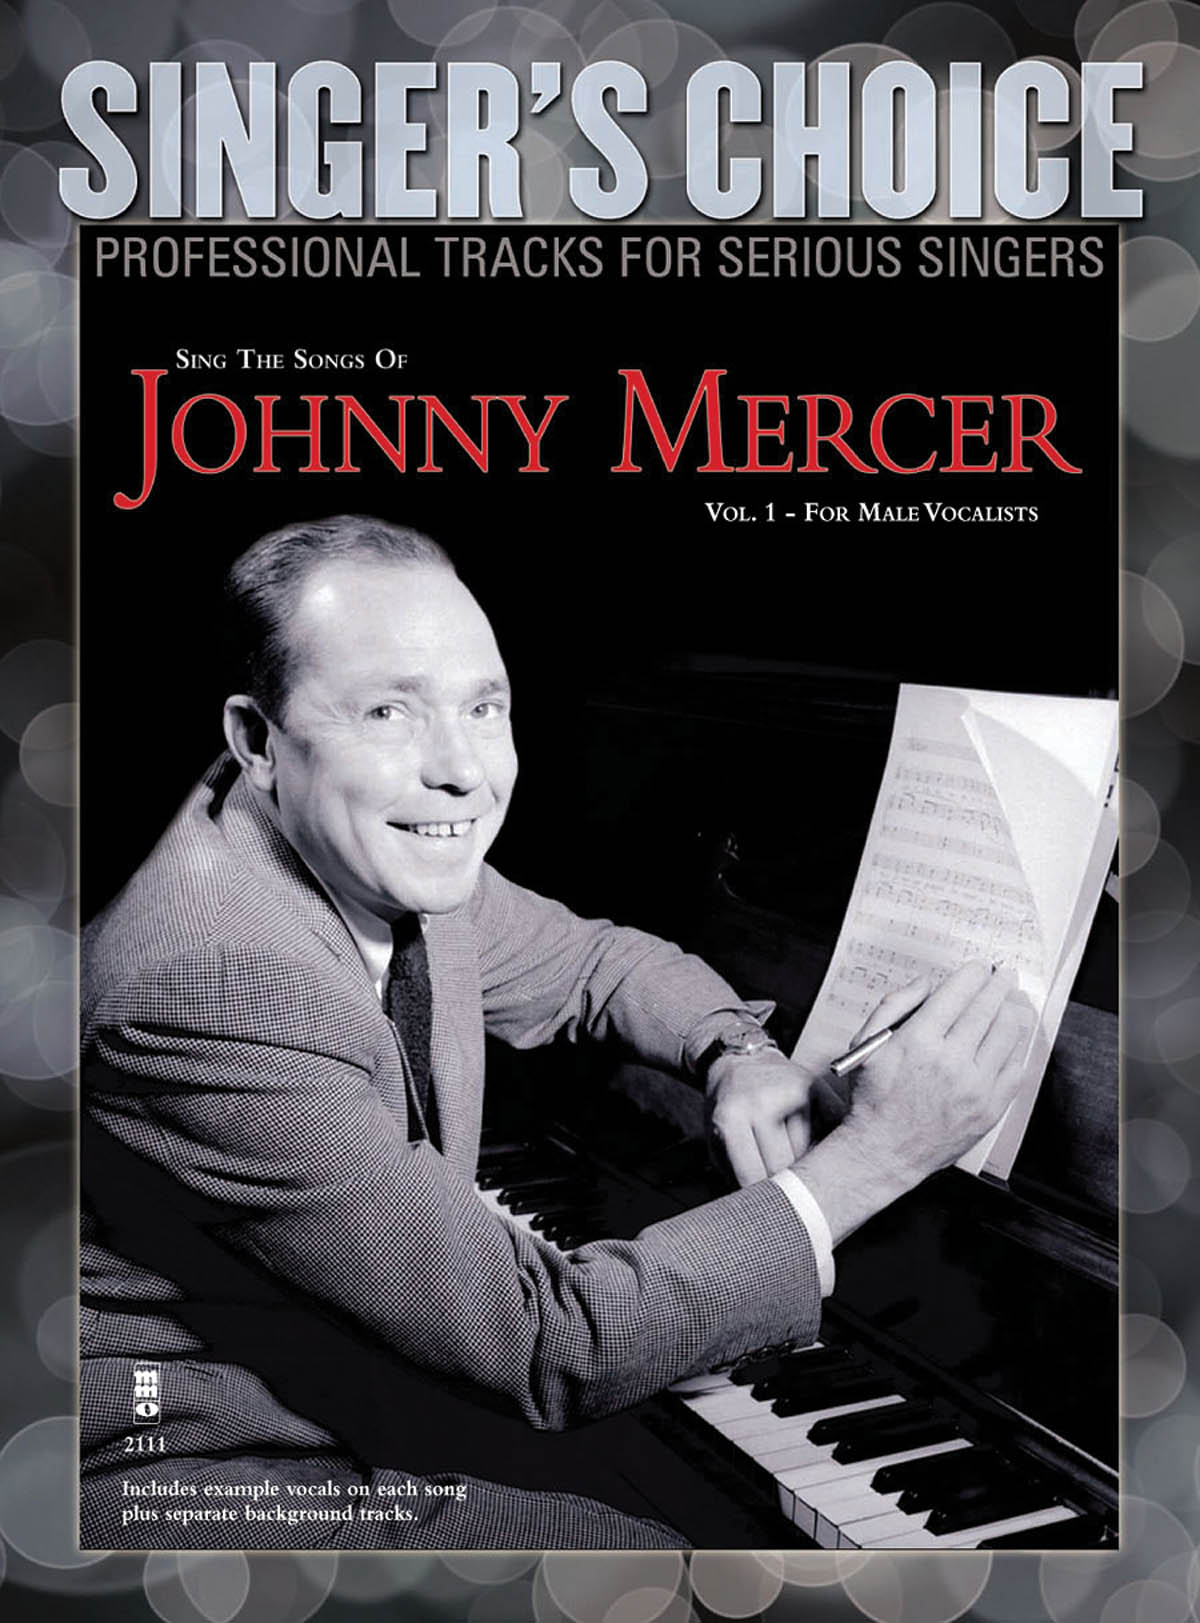 Sing the Songs of Johnny Mercer, Volume 1 - Singer's Choice - Professional Tracks for Serious Singers - pro zpěv